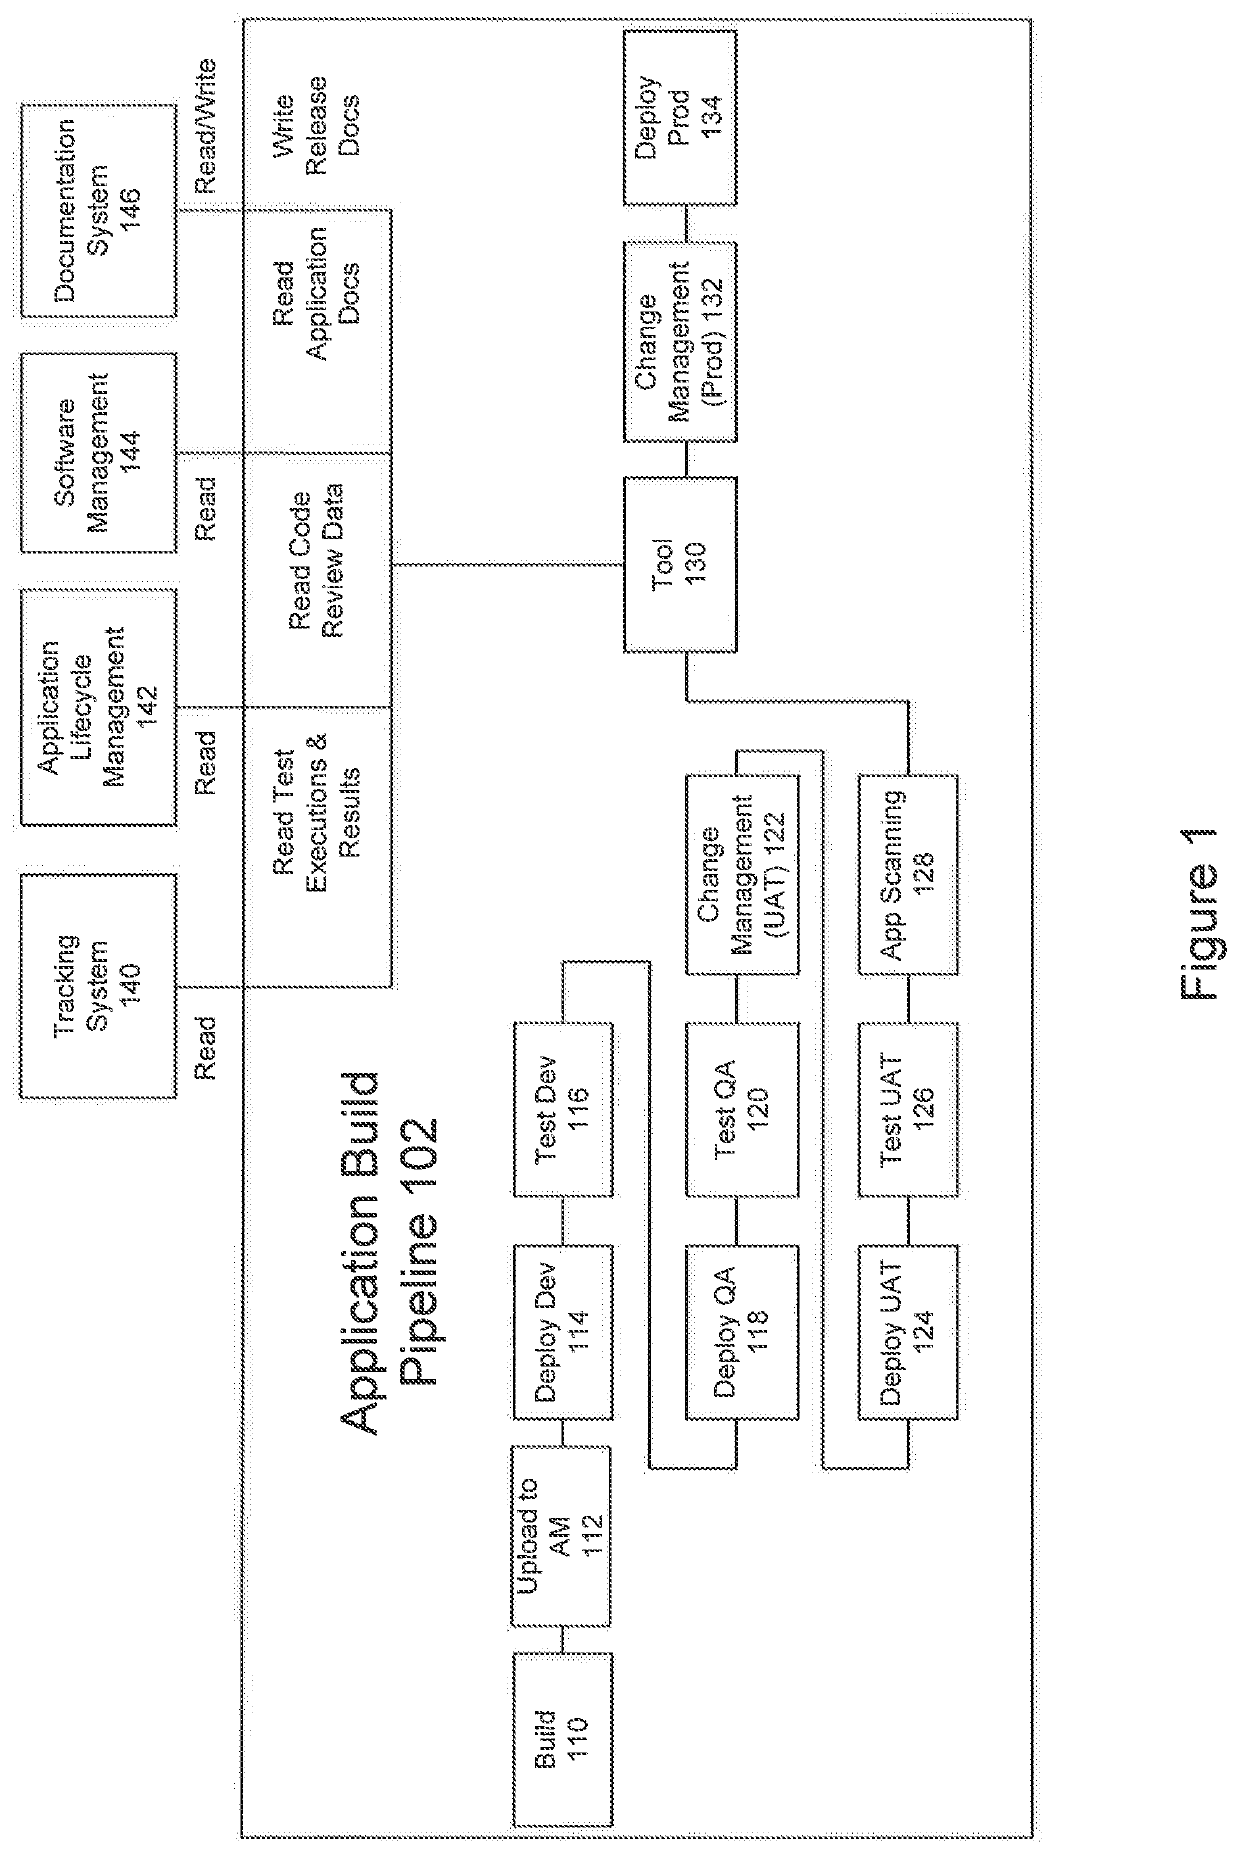 System and method for automated generation of software development life cycle audit documentation